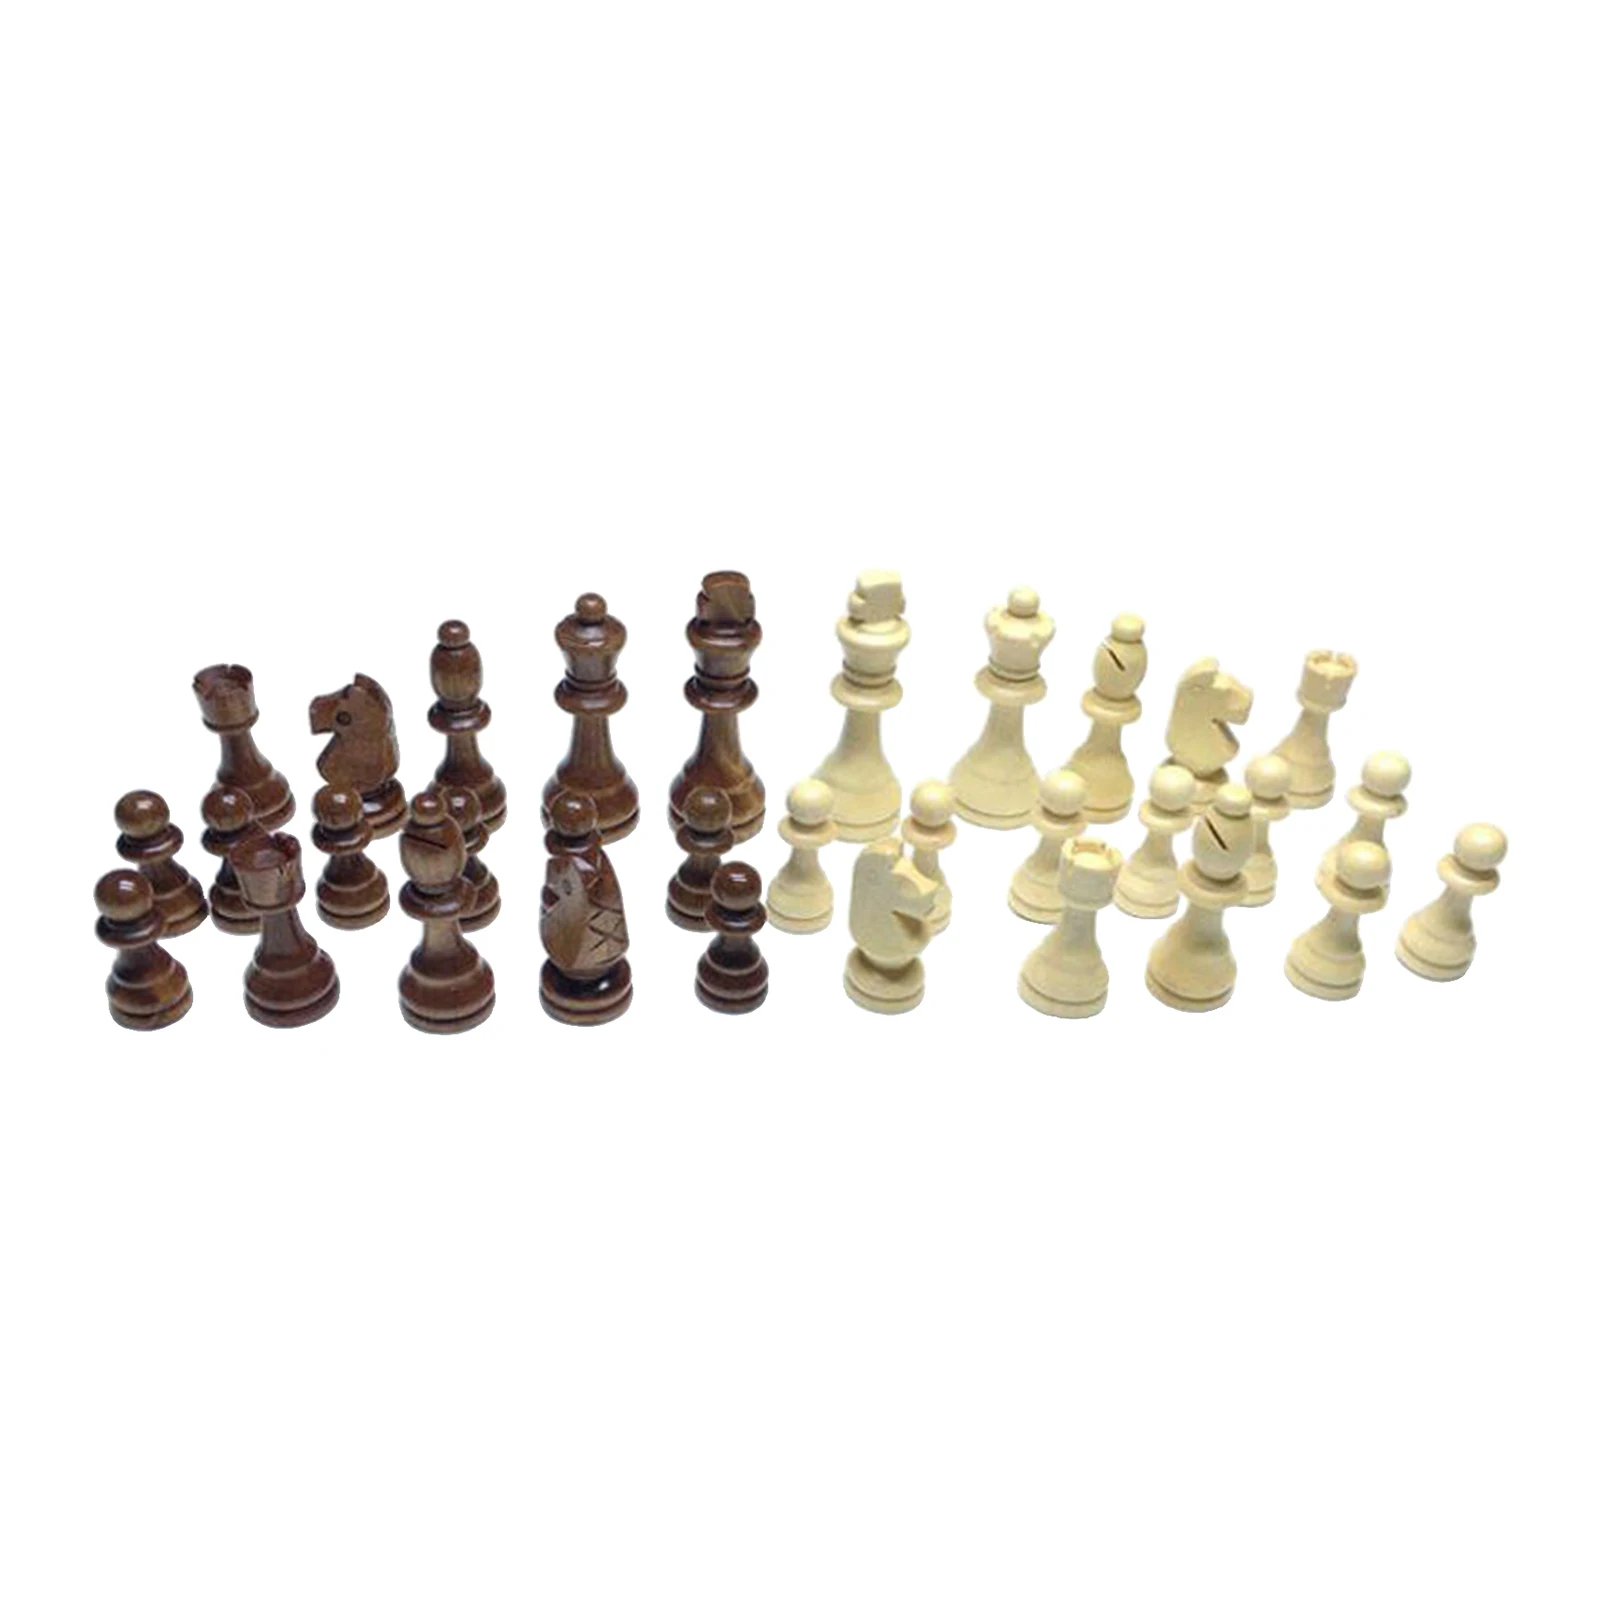 Wooden Chess Pieces 32PCS International-Chess Pieces Wood Chessmen Pieces Party Board Game Toy Accessories Chess Pieces